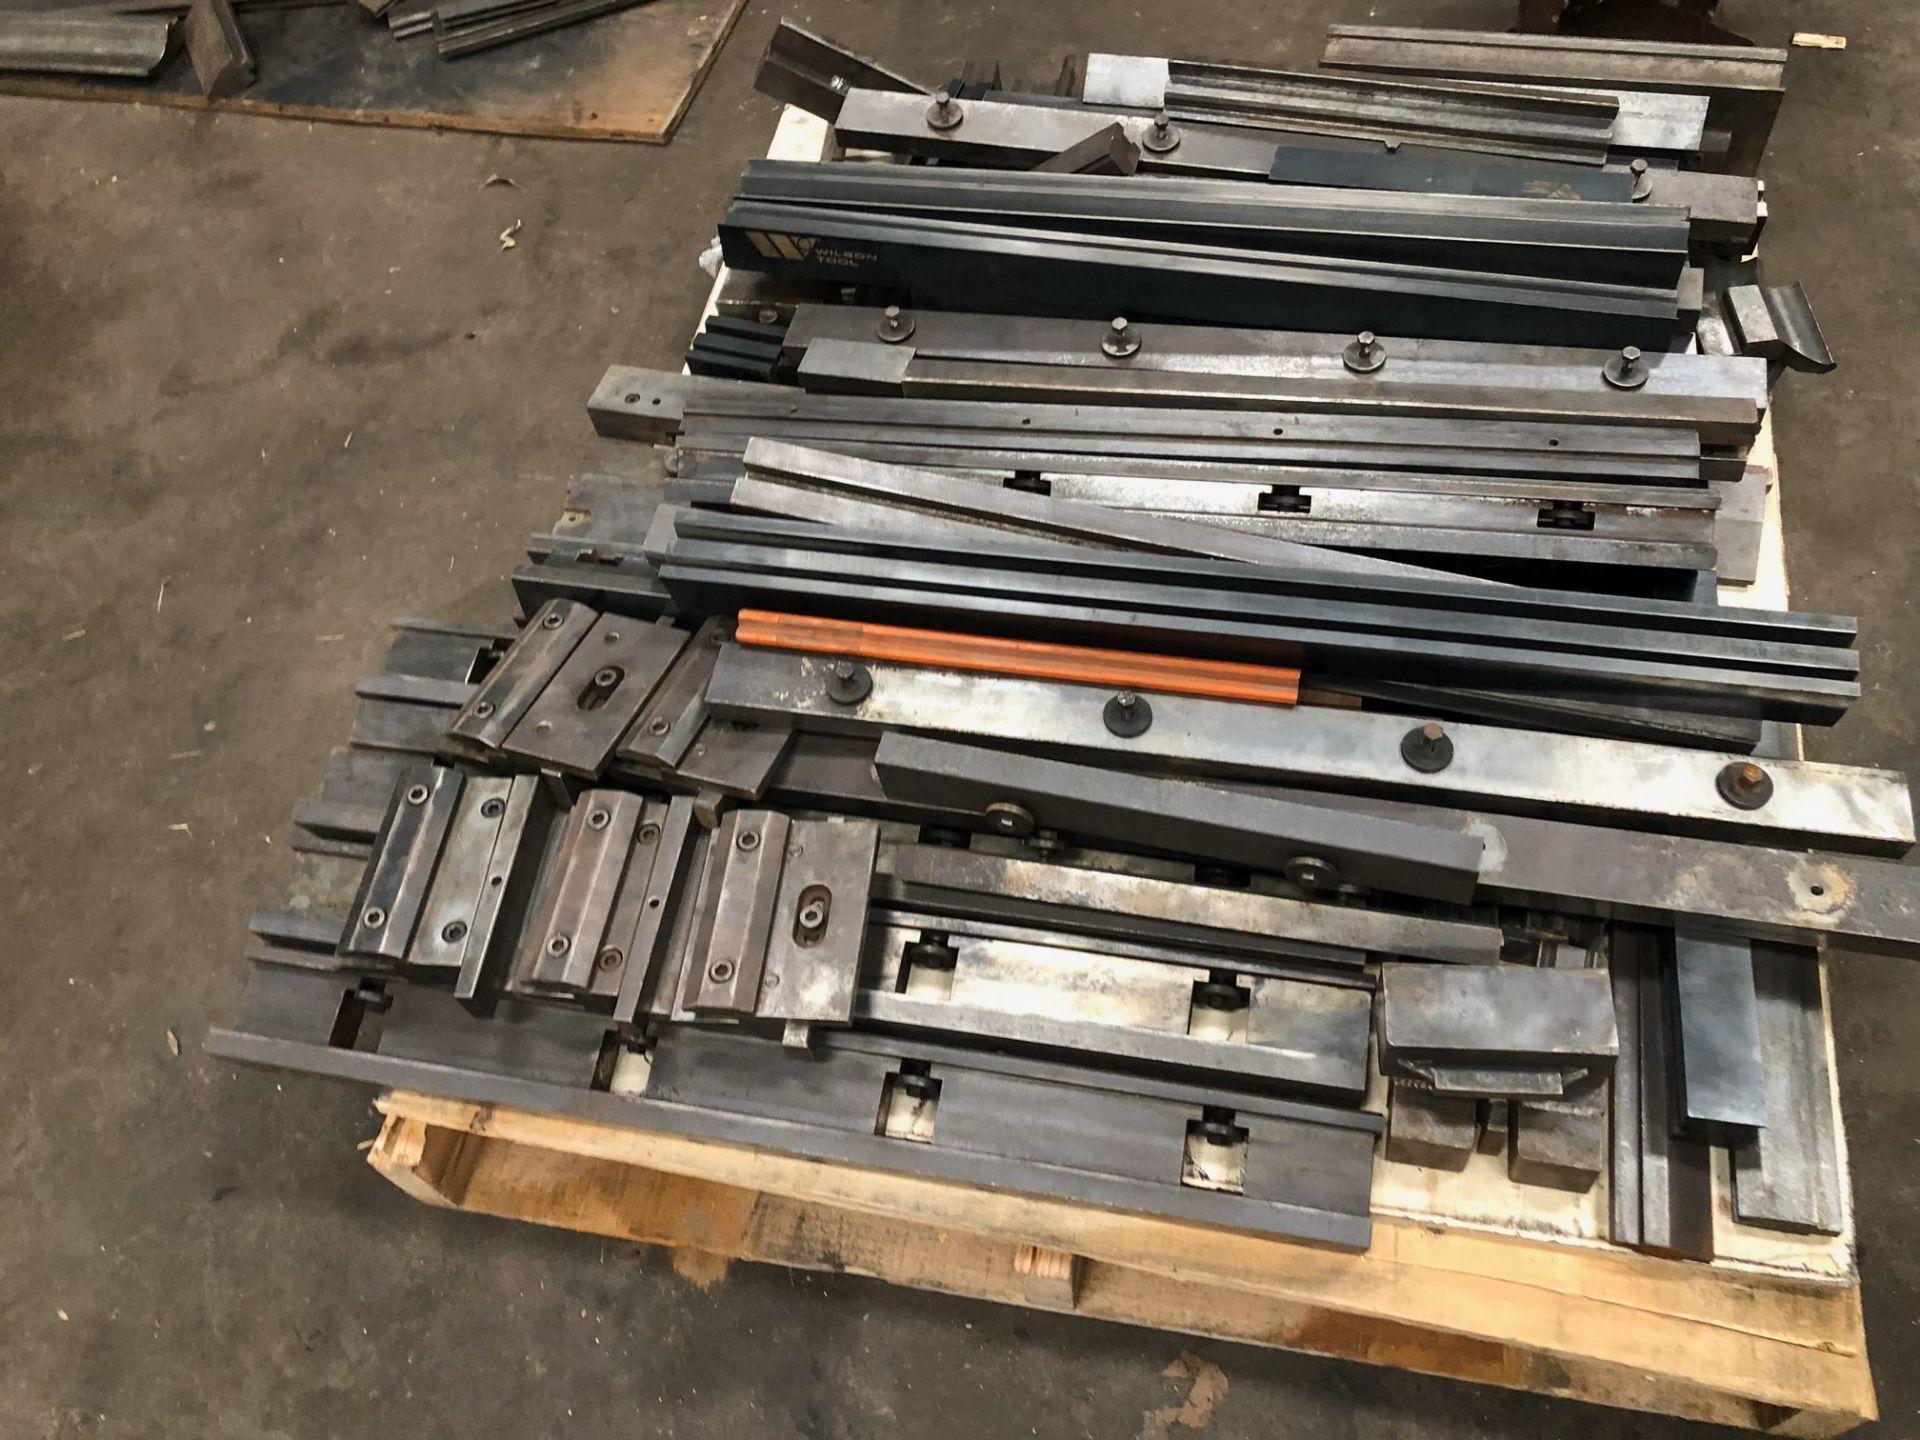 LOT OF PRESS BRAKE DIES, AMADA (Located at: Pitts by JJ, 3426 Hopper Road, Houston, TX 77093)